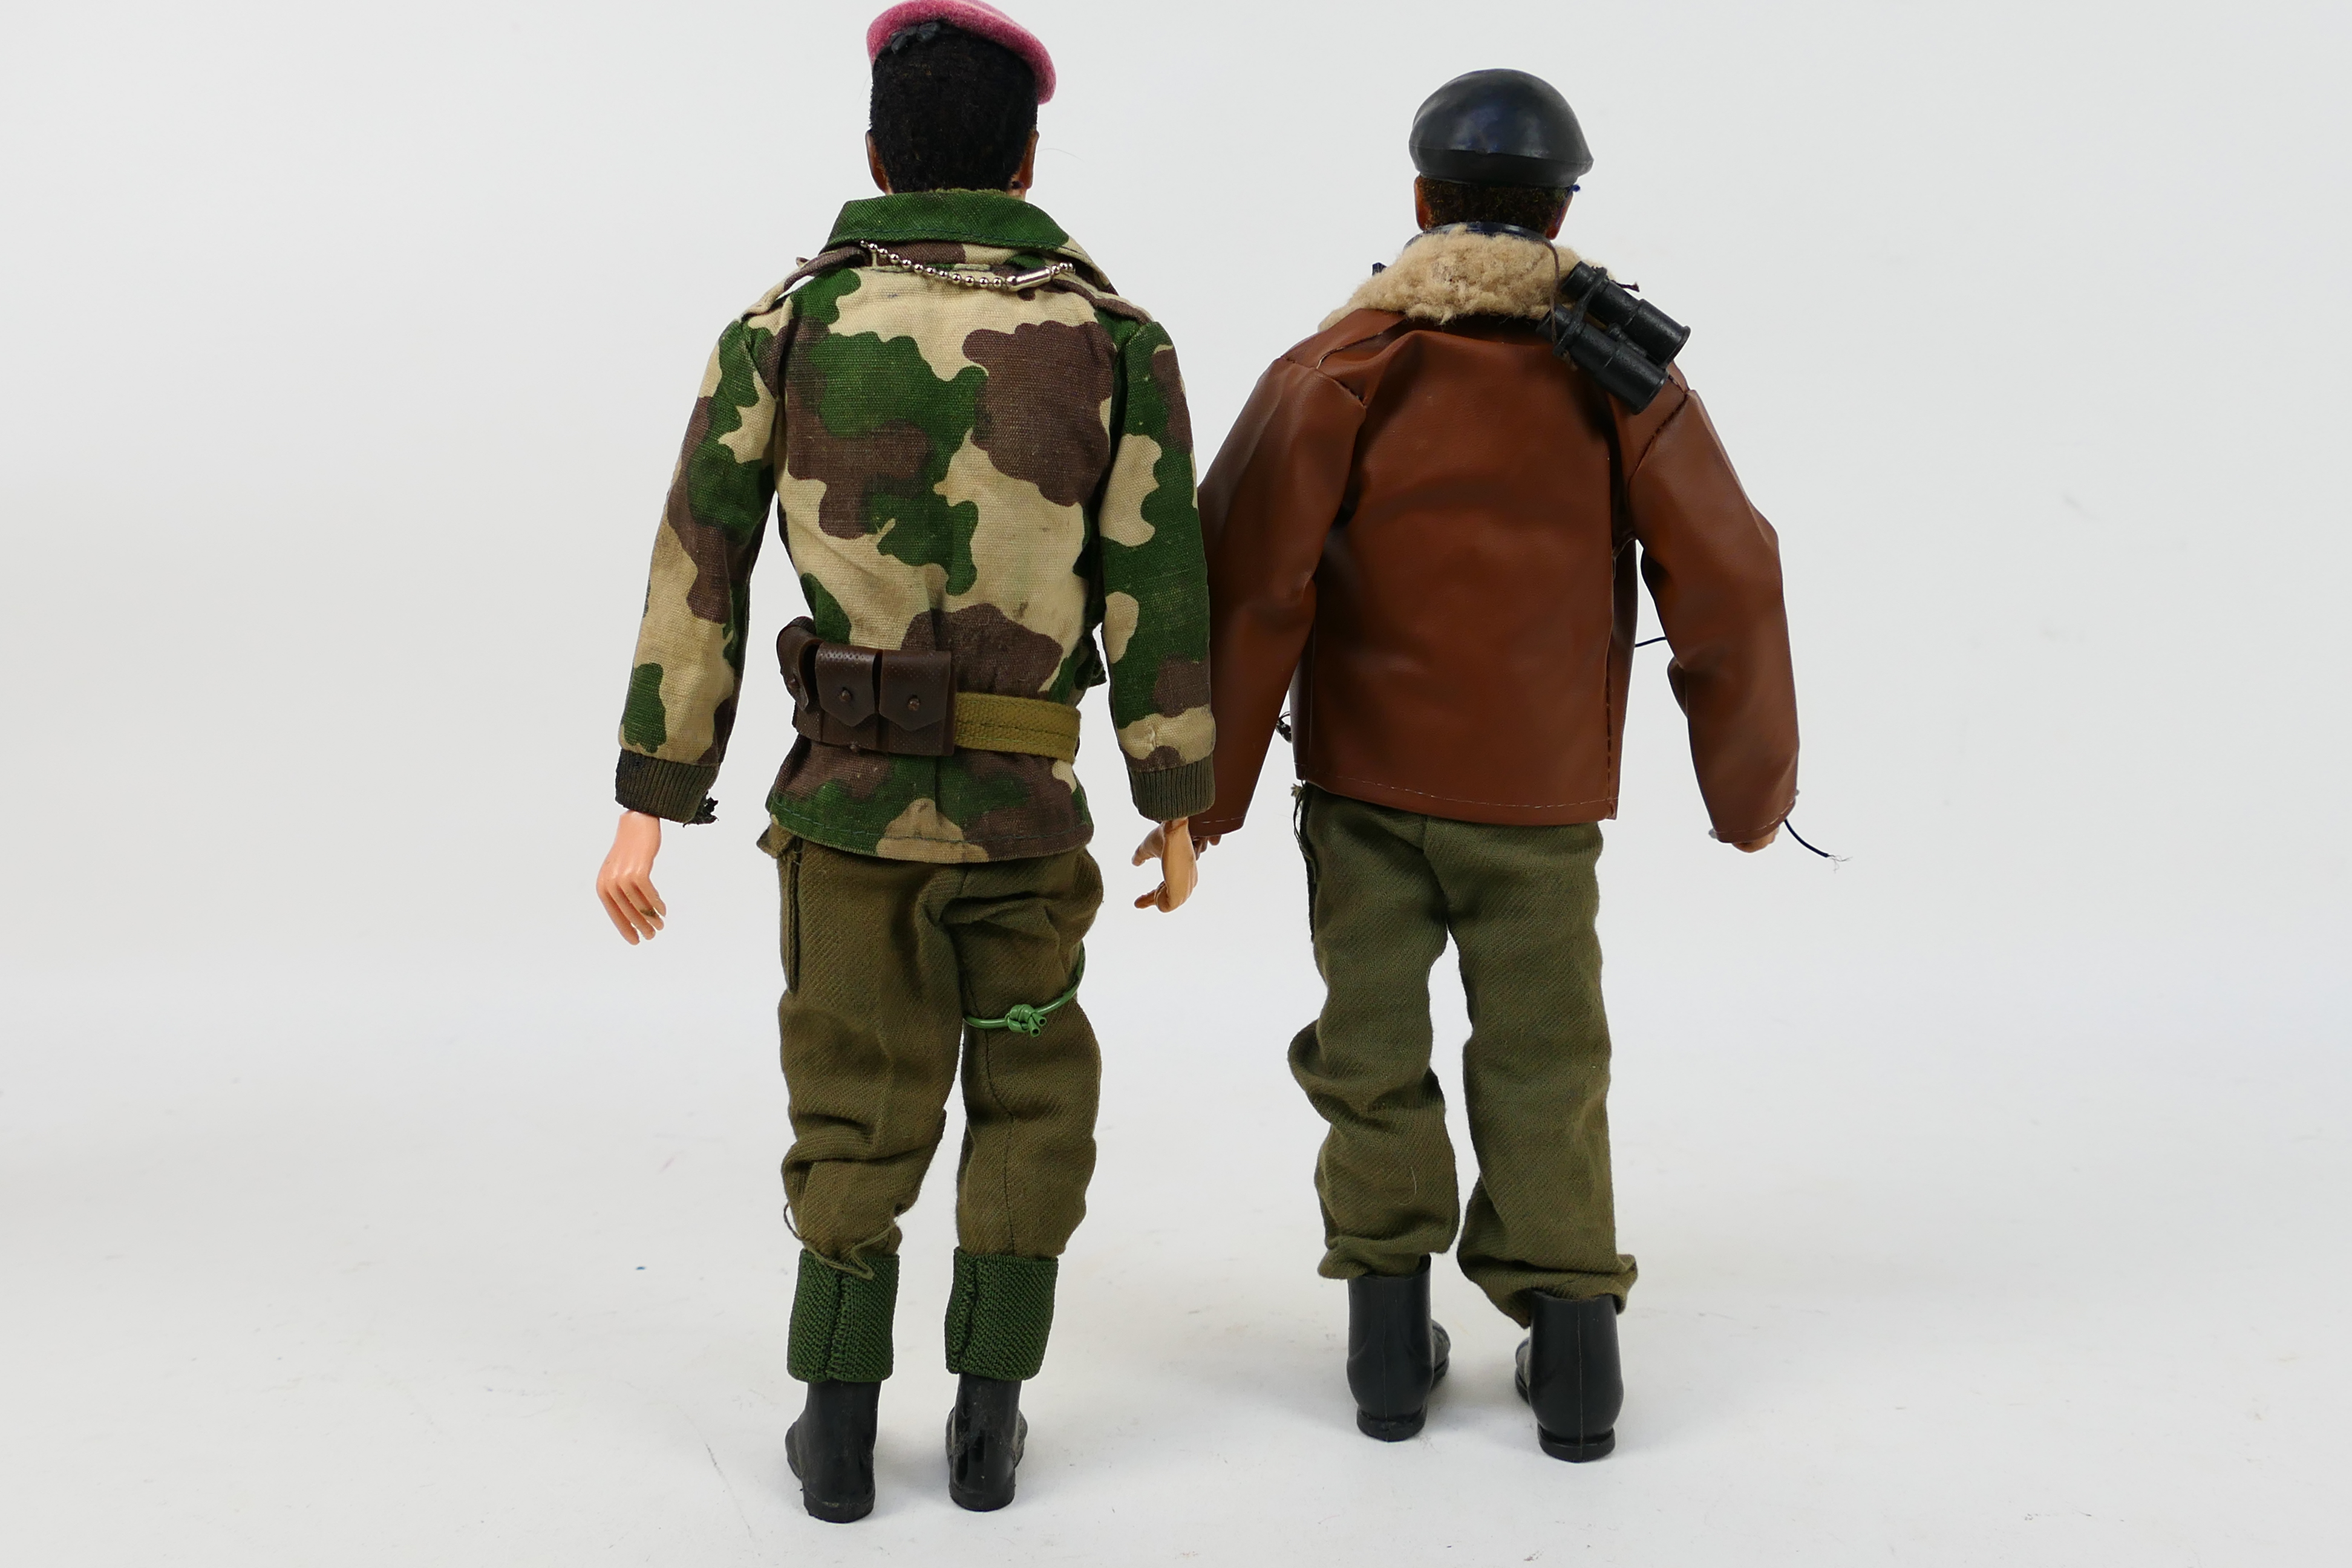 Palitoy - Action Man - Two unboxed vintage Action Man figures in Tank Commander and Parachute - Image 6 of 8